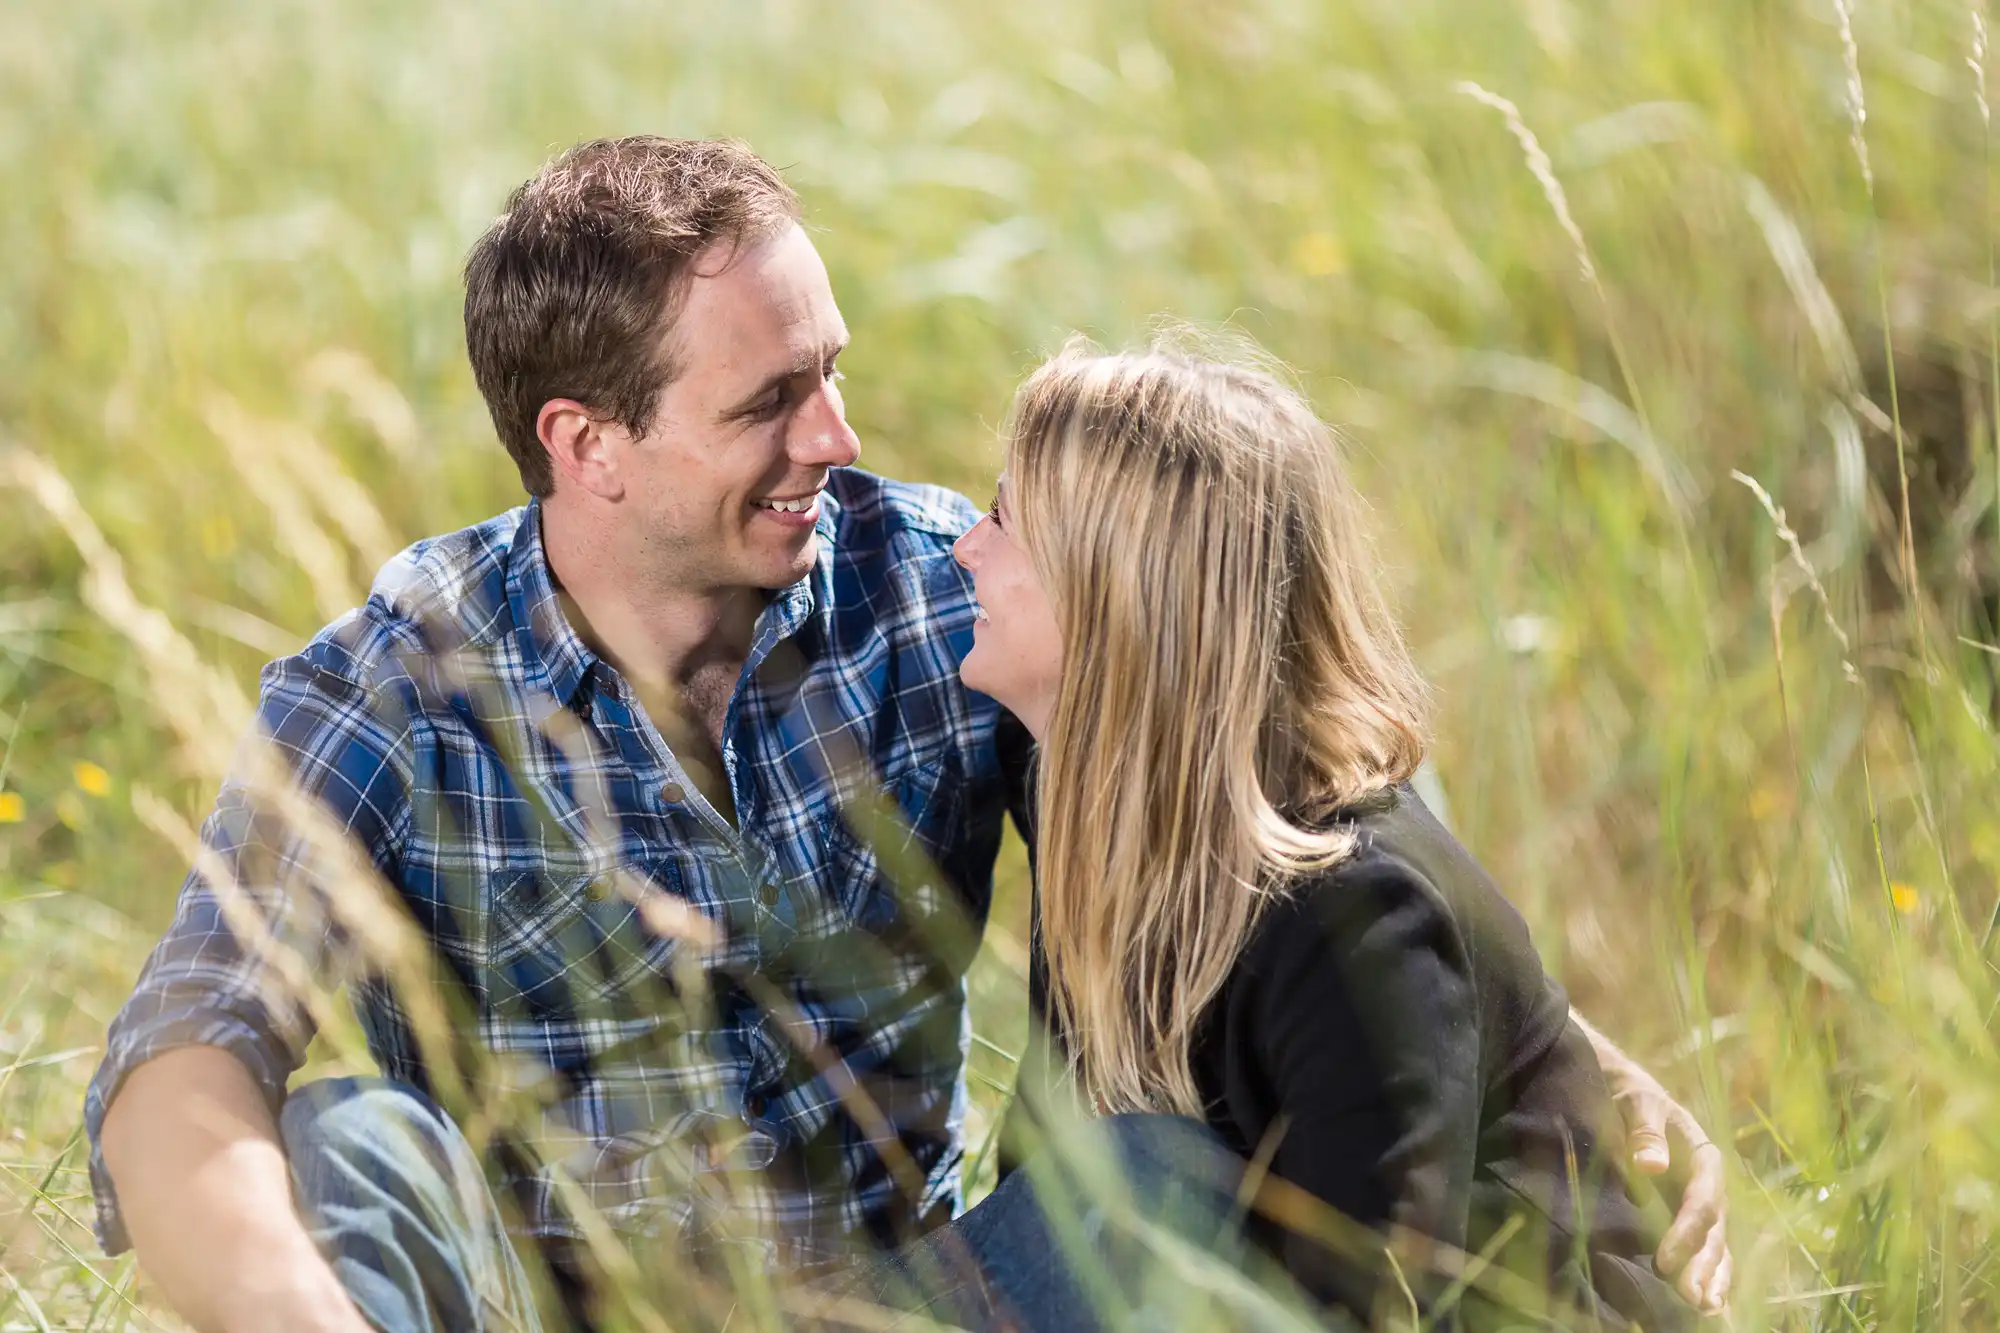 A couple sits closely in a field, smiling at each other among tall grasses, with a soft focus on surrounding greenery.